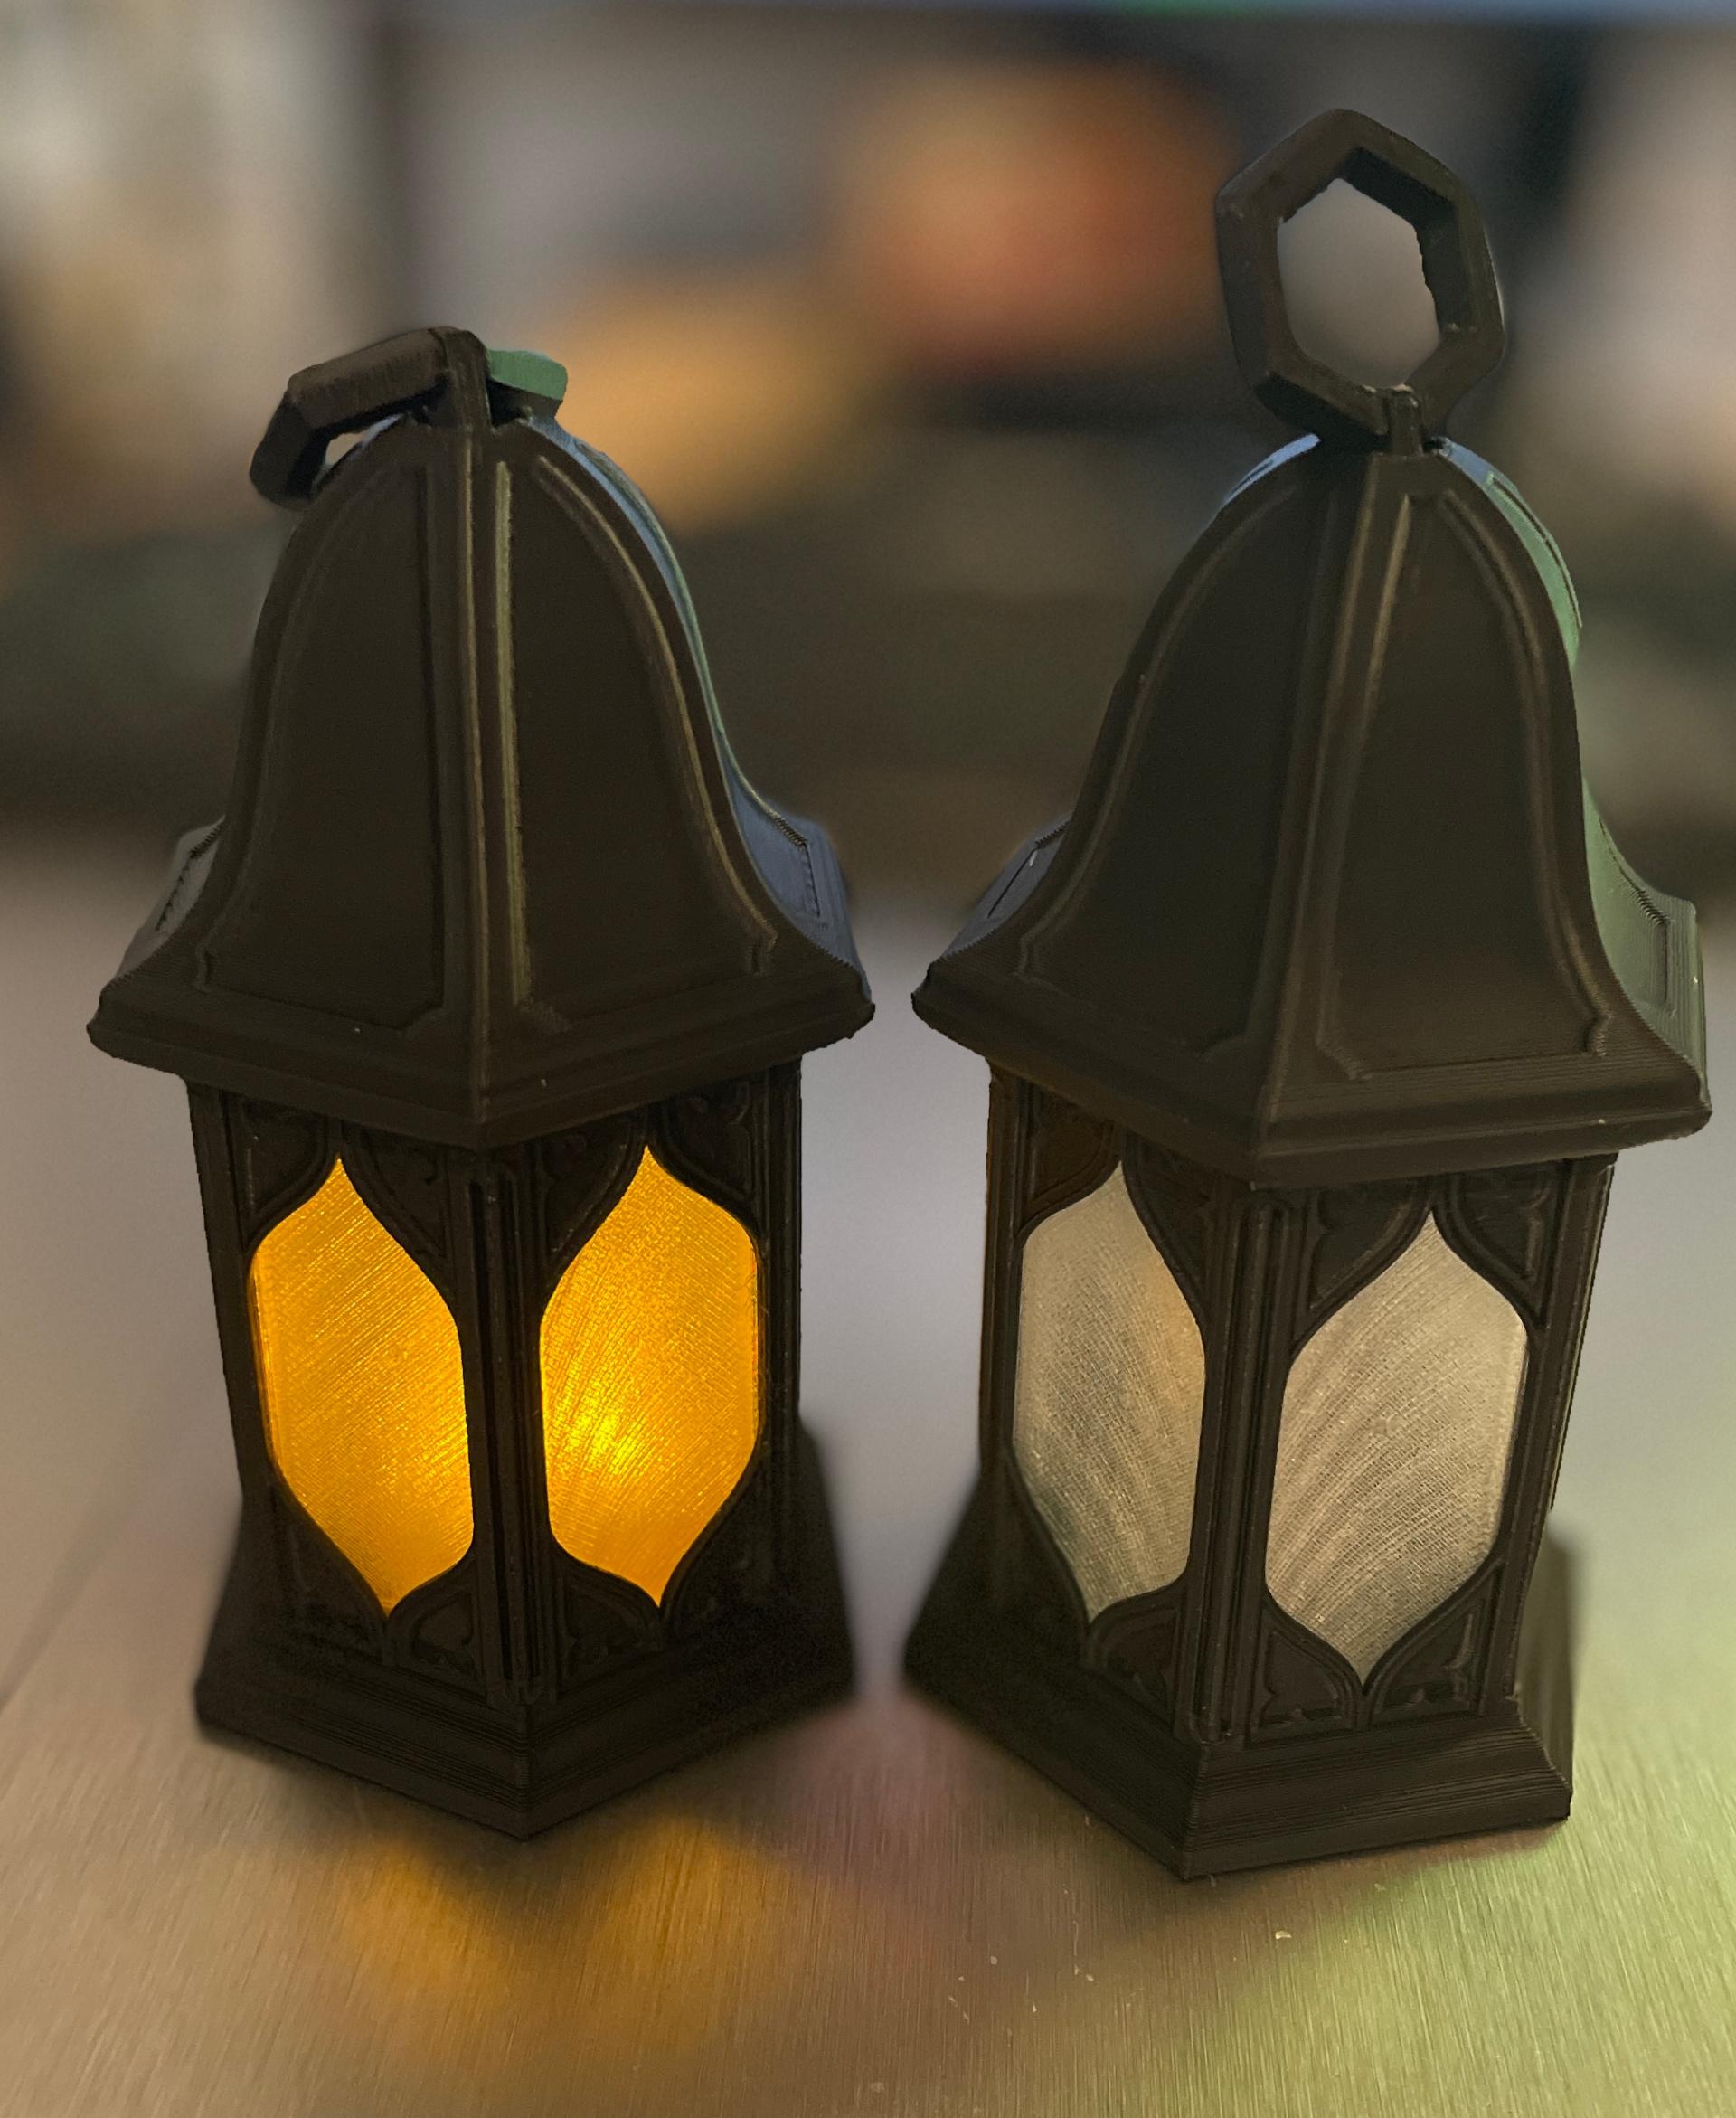 Gothic Lantern - Hanging Version - very nice design, thanks for sharing =)
I scaled it down so that at least one LED tea light goes in. - 3d model